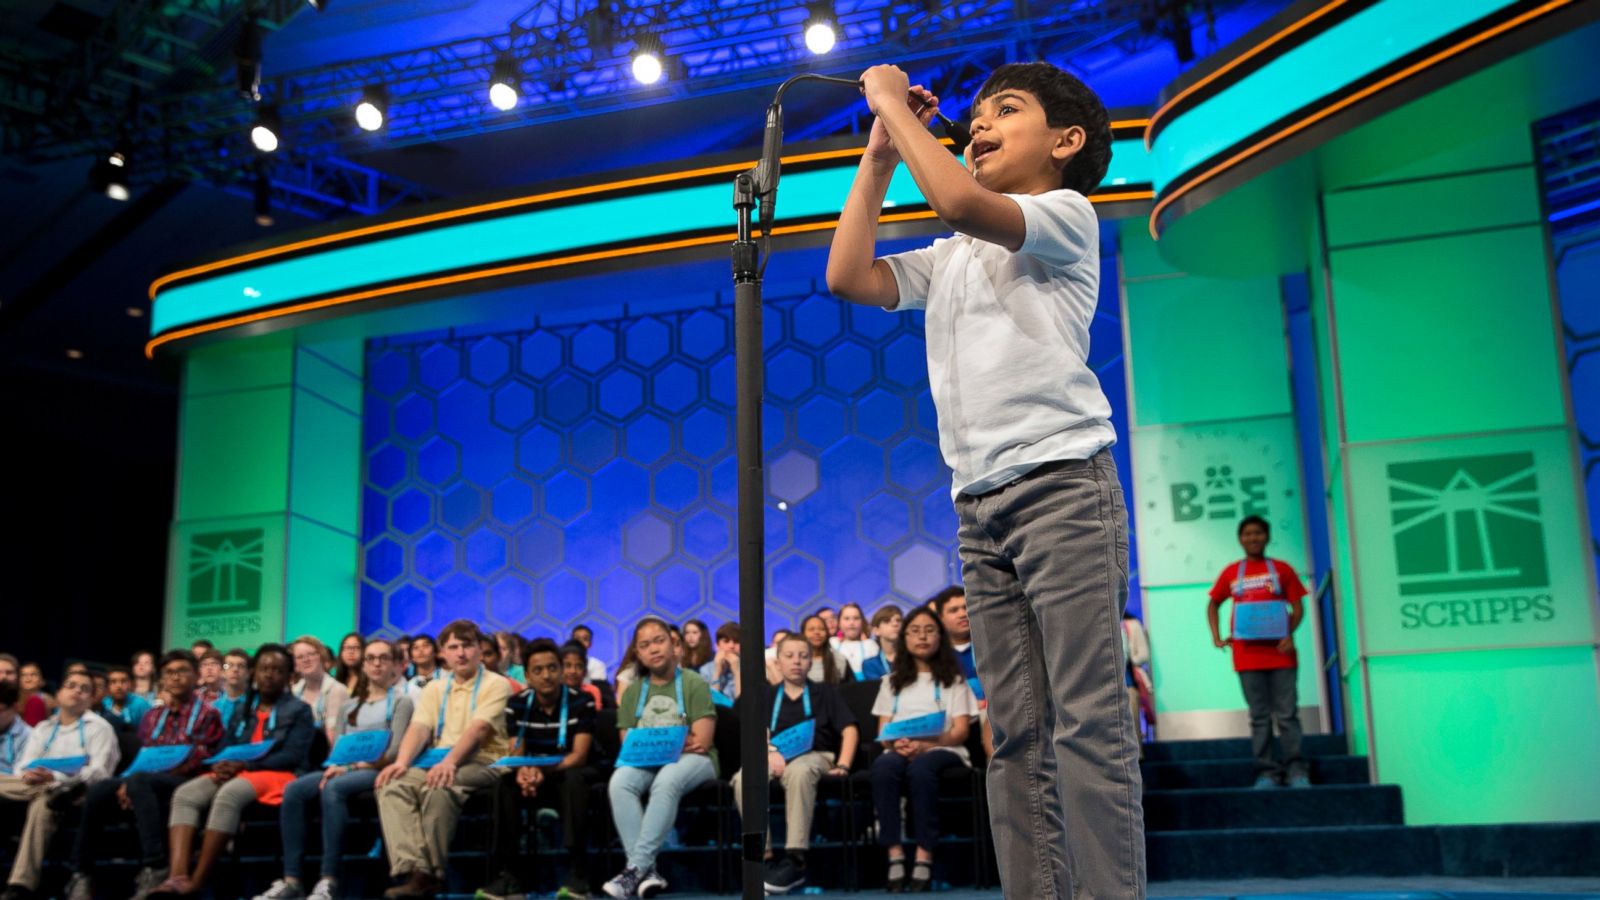 Meet the Scripps National Spelling Bee's Youngest Contestant